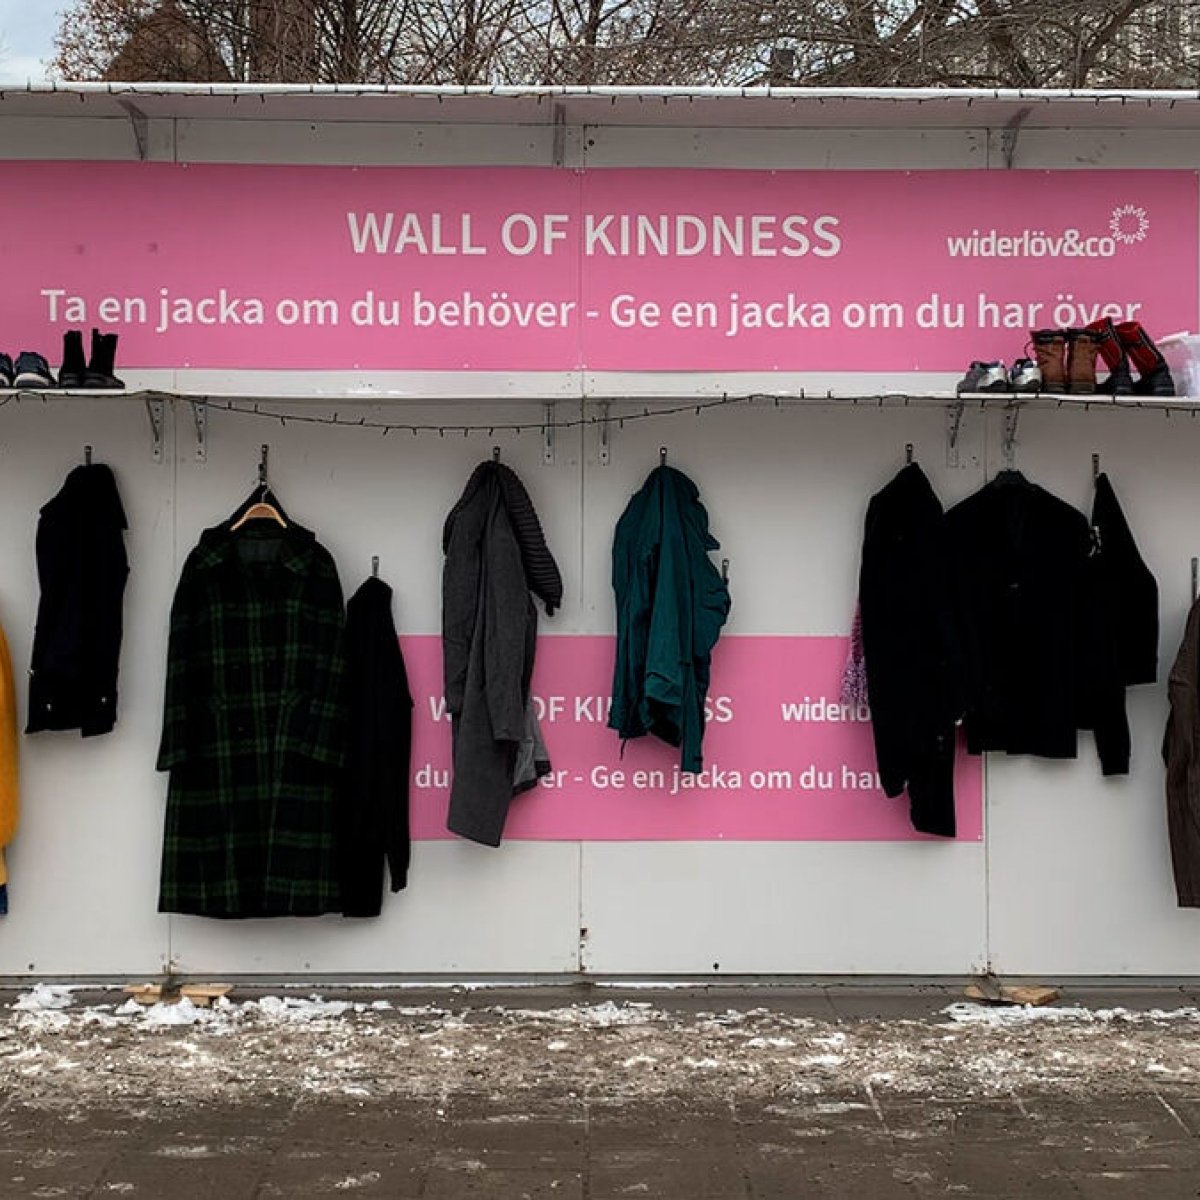 Cozy vibes alert! 🇸🇪 Sweden's 'Wall of Kindness' is like a giant hug—providing free winter coats for those in need! 🤗 Have spare coats? Drop them off and be a part of this feel-good wave! 🧤 #takeastep #coatsforall #kindnesswall #sustainablefuture